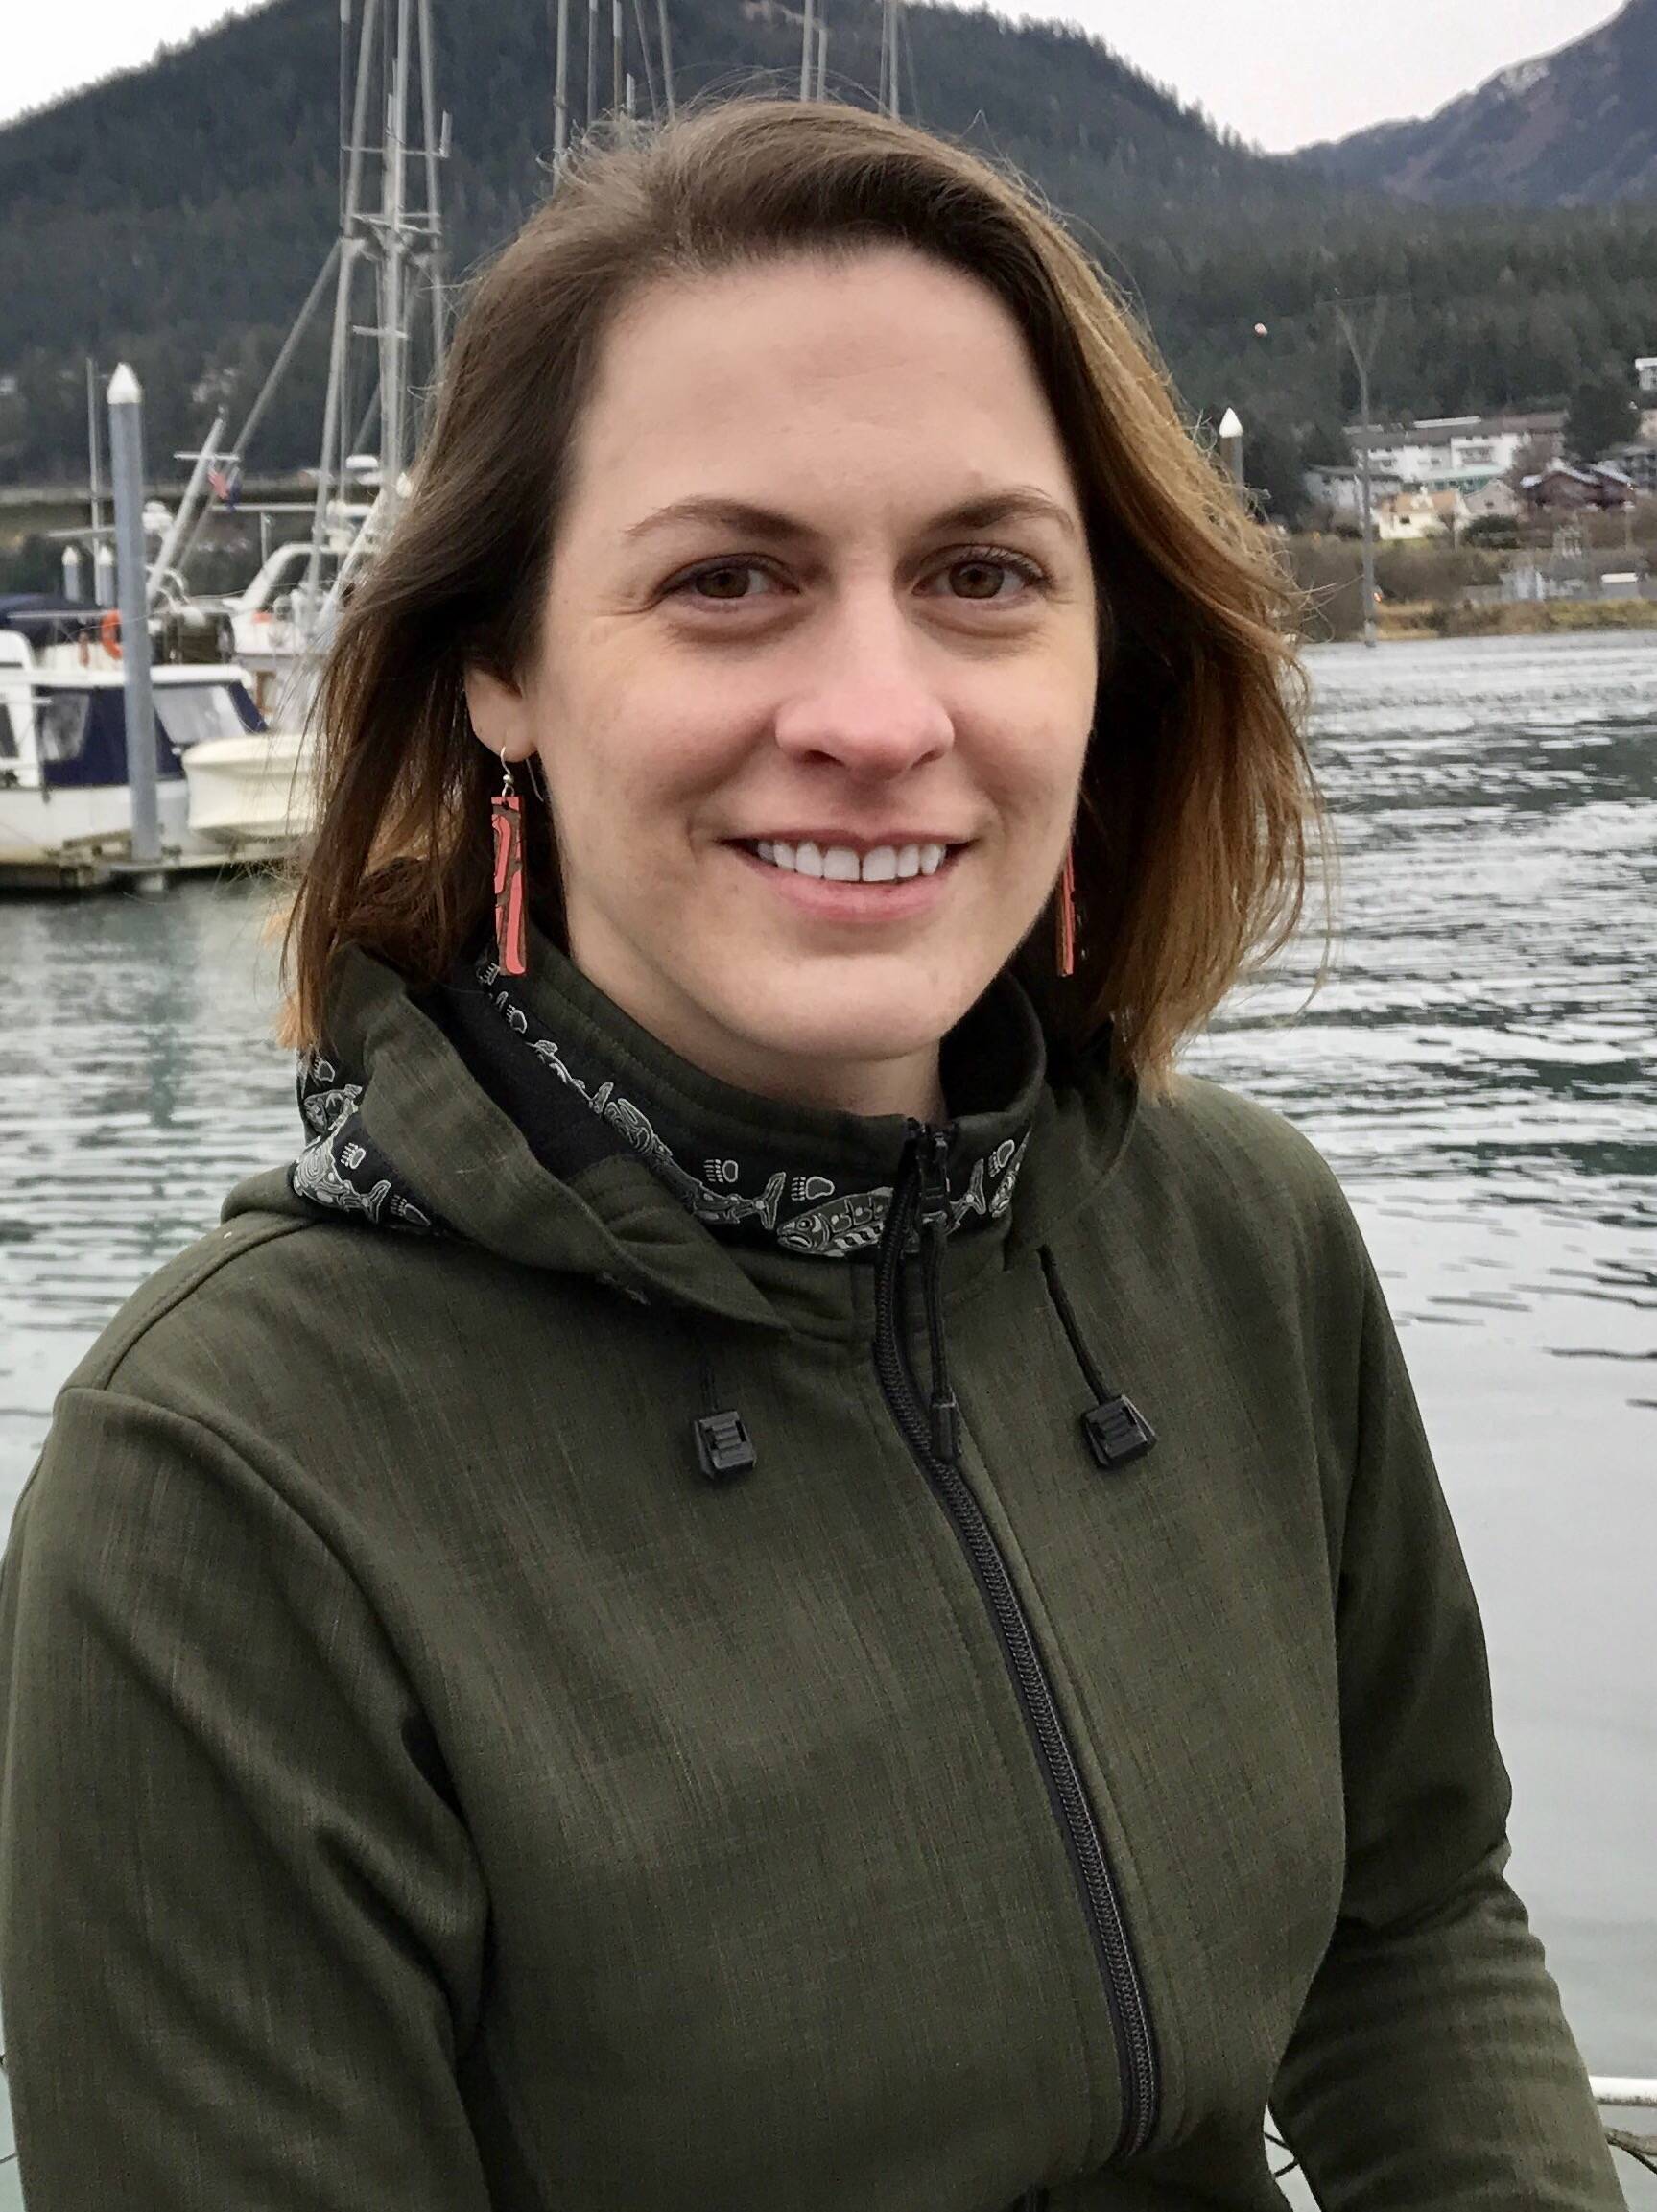 Frances Leach, pictured here in this undated photo, has been named the new executive director of the United Fishermen of Alaska, effective Jan. 5, 2018. (Photo courtesy the United Fishermen of Alaska)